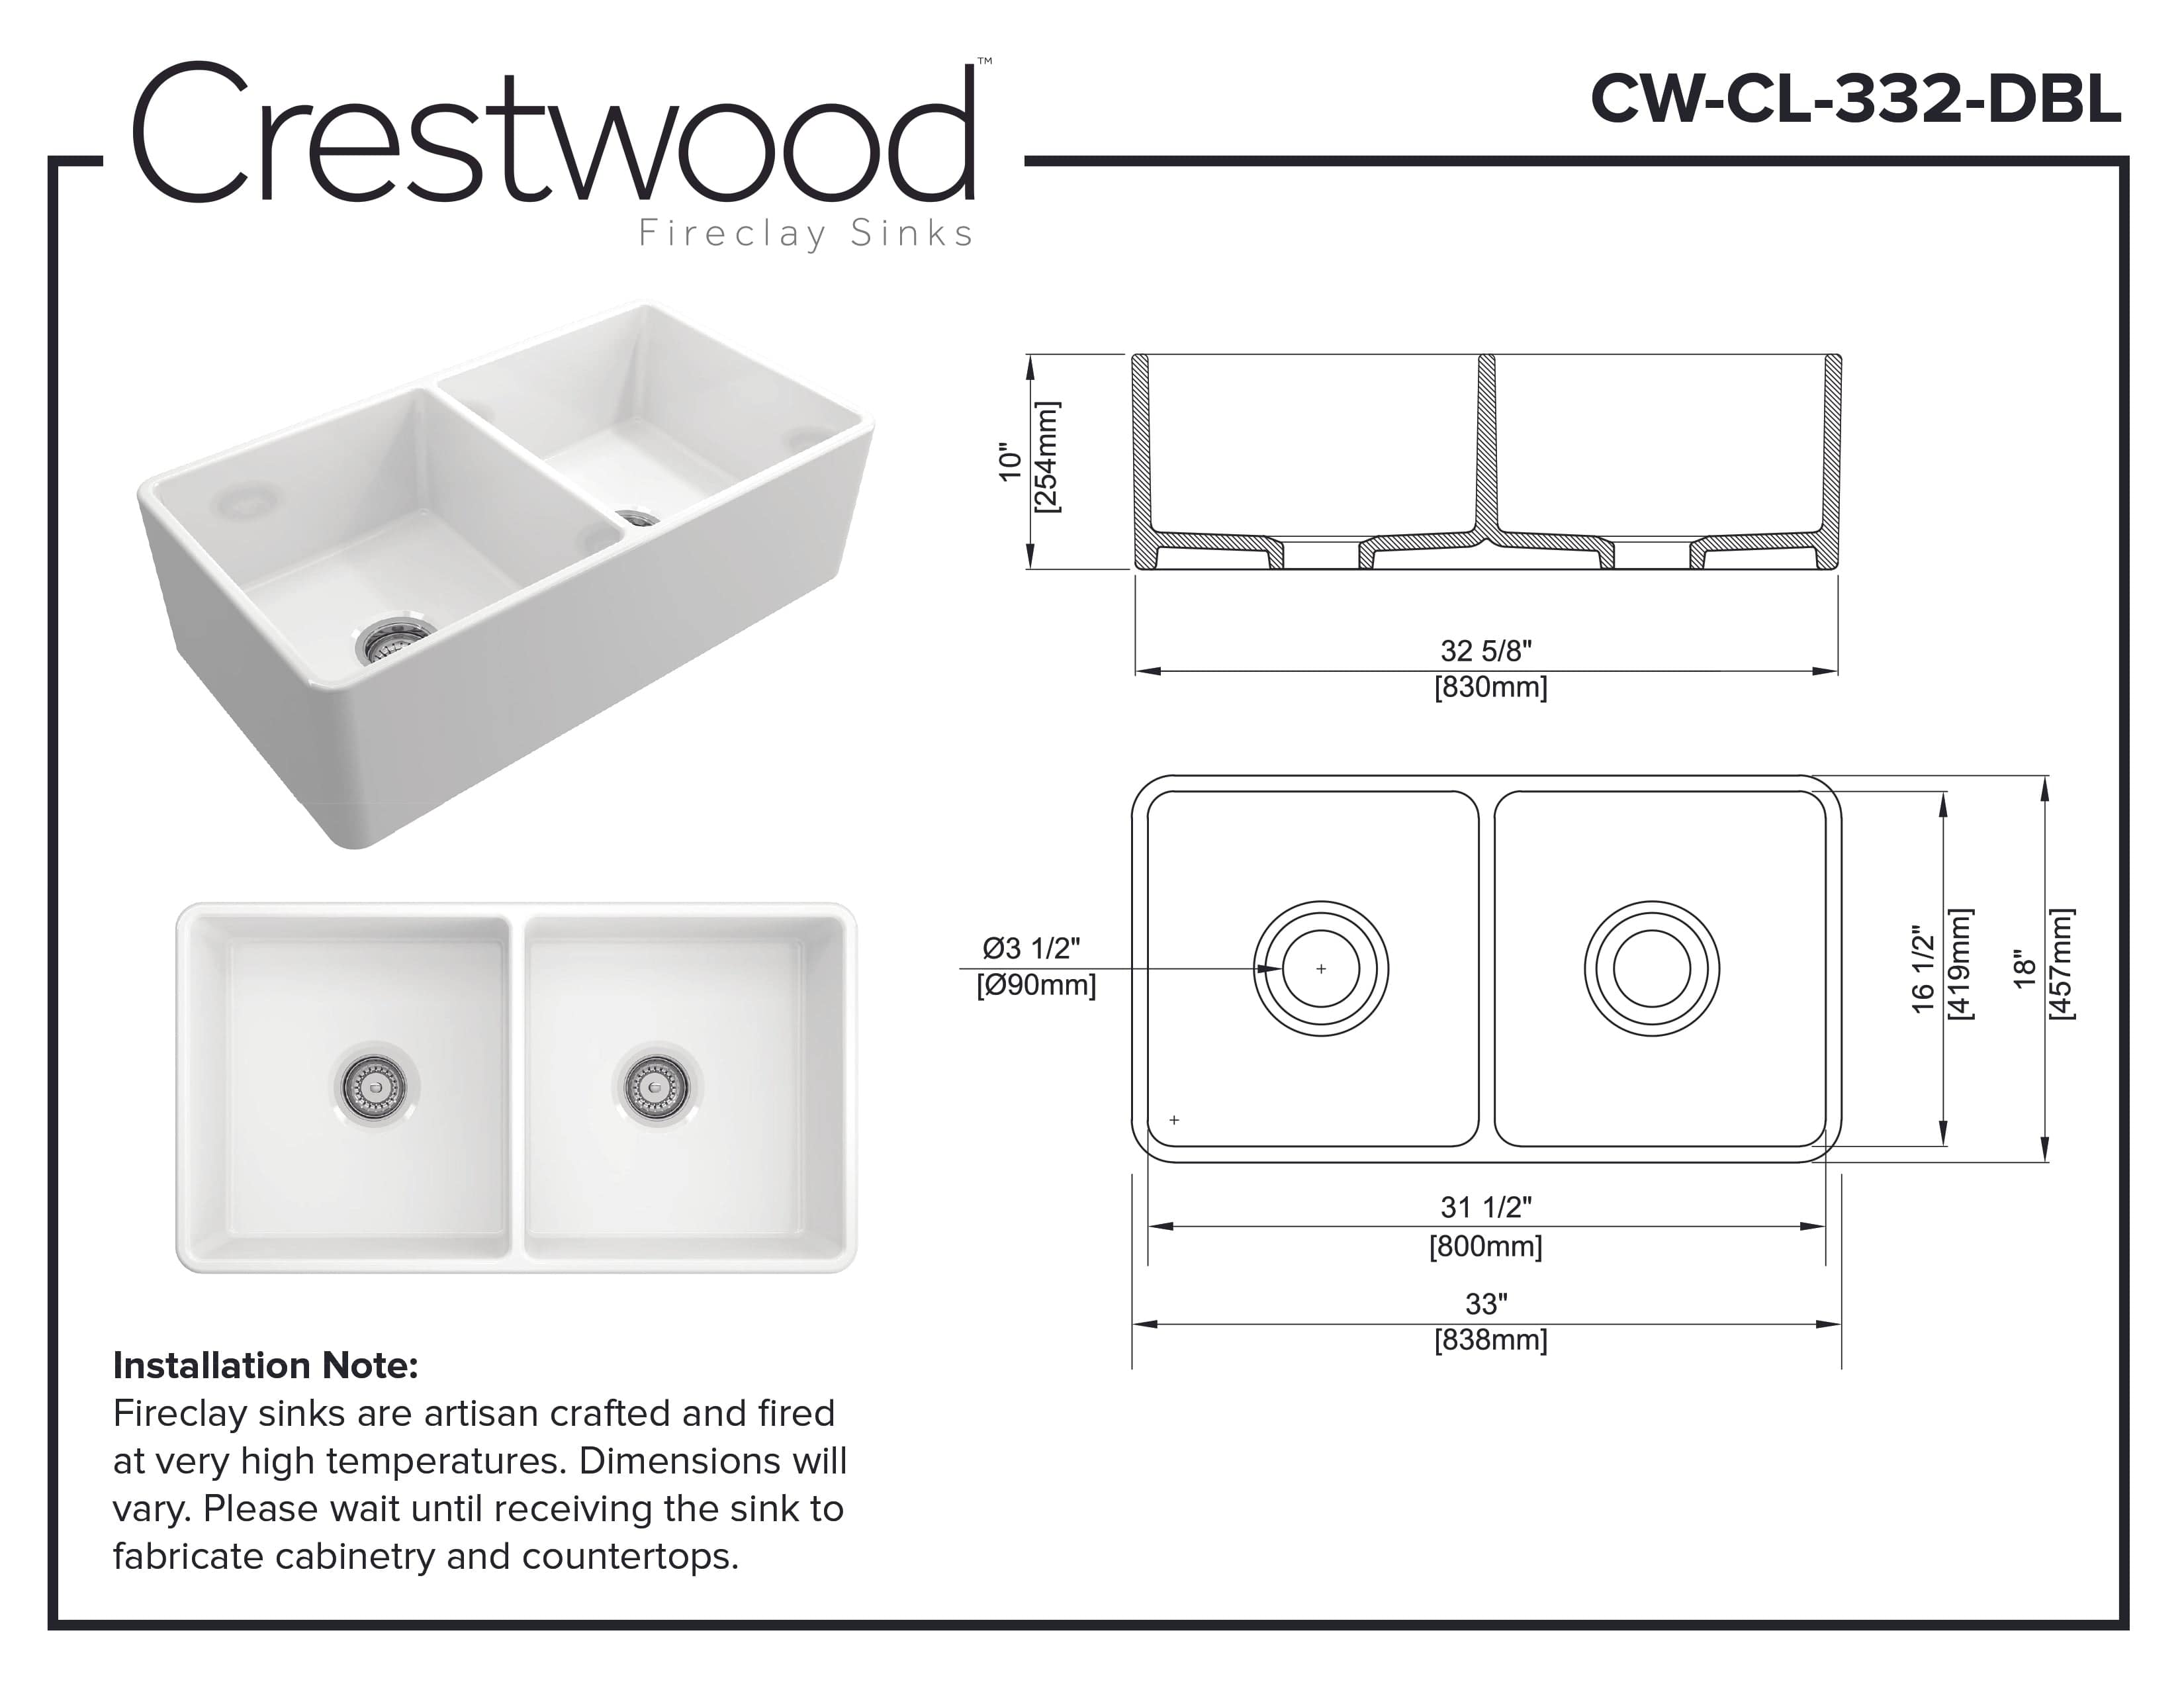 Crestwood 33" Classic Double Bowl Fireclay Sink